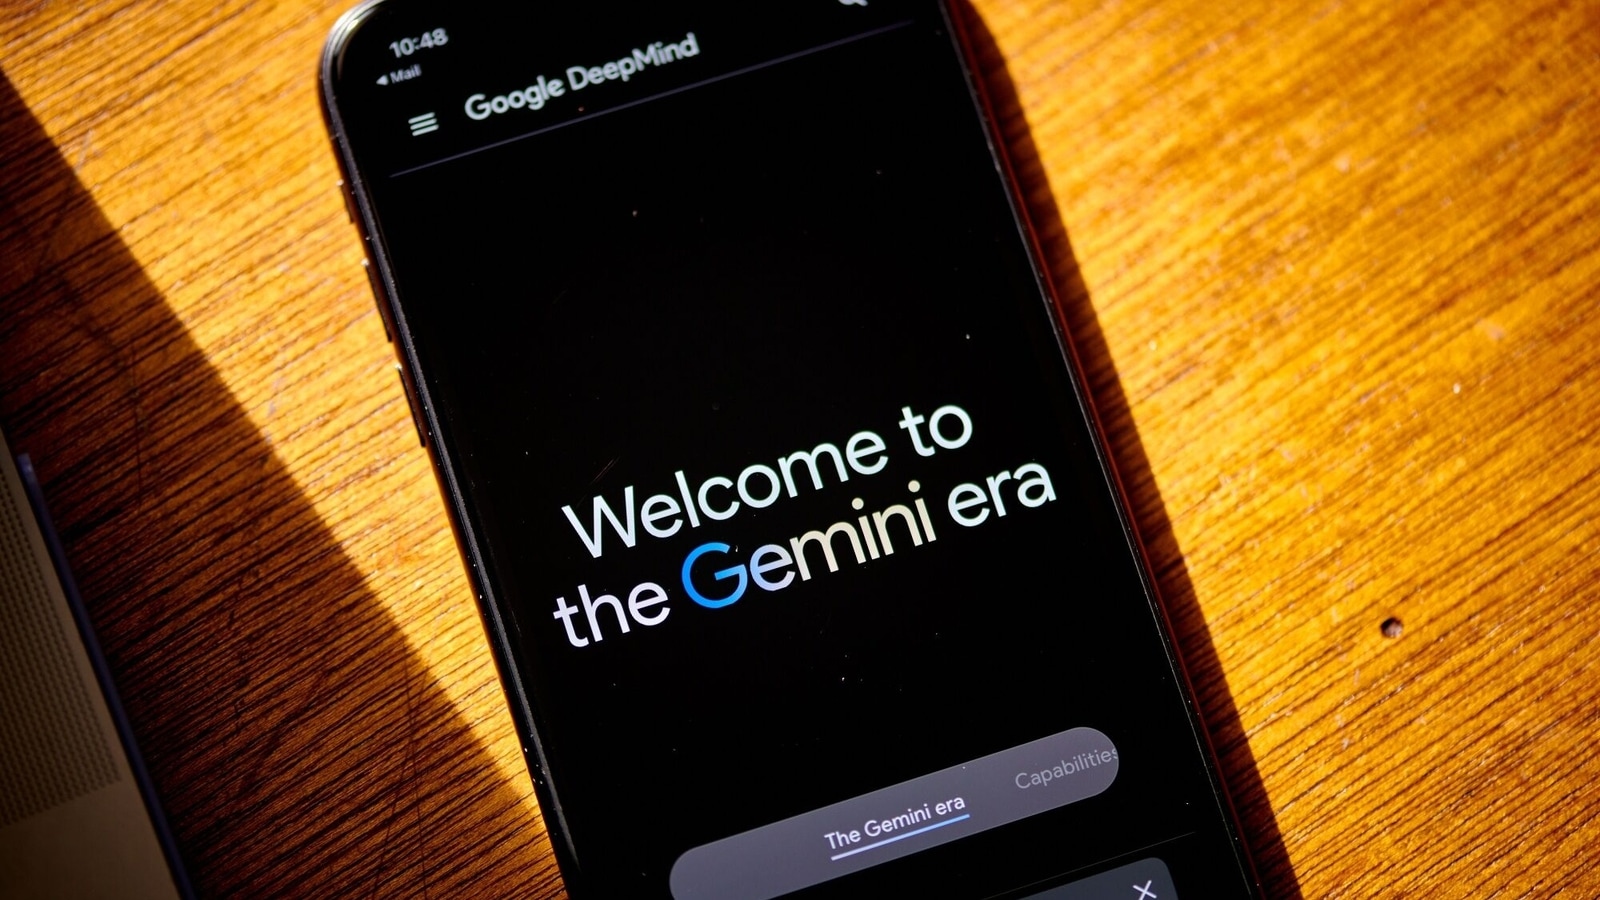 Google Gemini may expose delicate information researcher warns concerning the abuse of chatbot